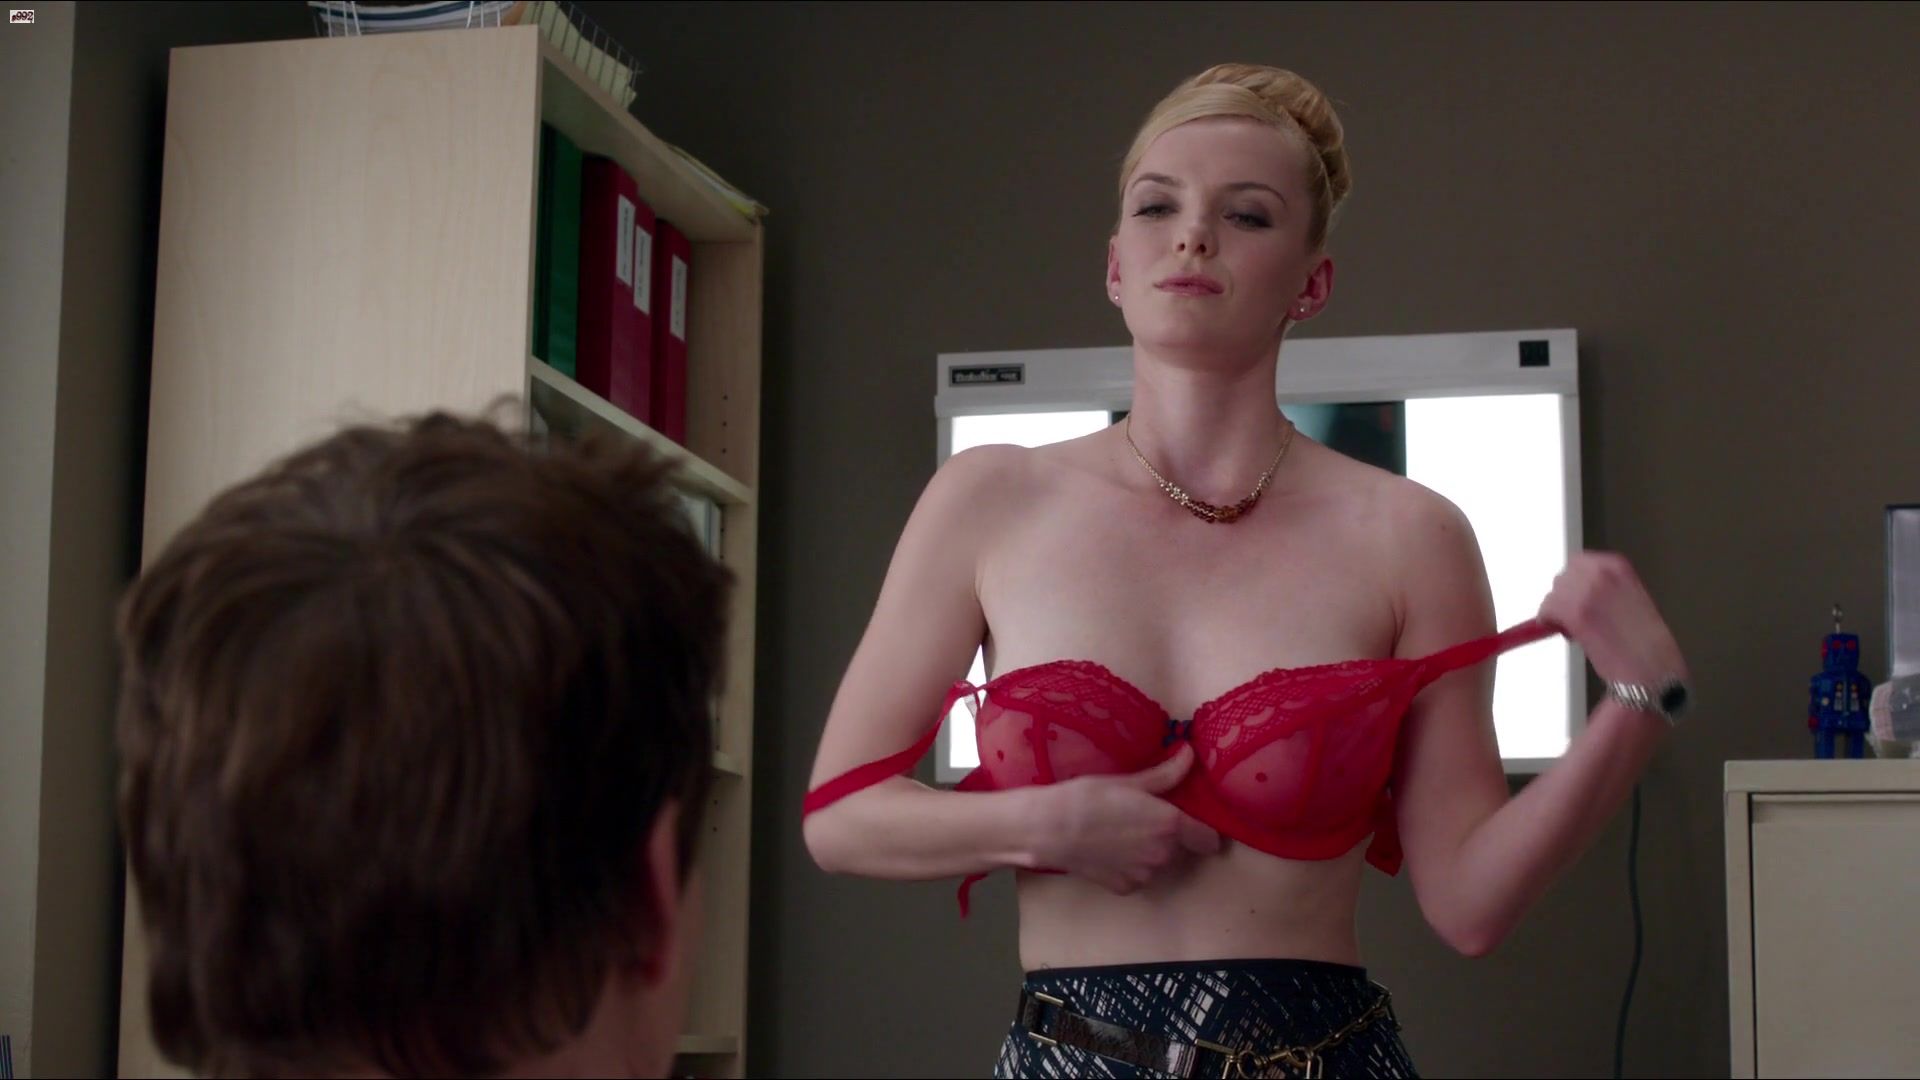 Exposed Betty Gilpin topless cowgirl scene of the TV show "Nurse Jackie" OnOff